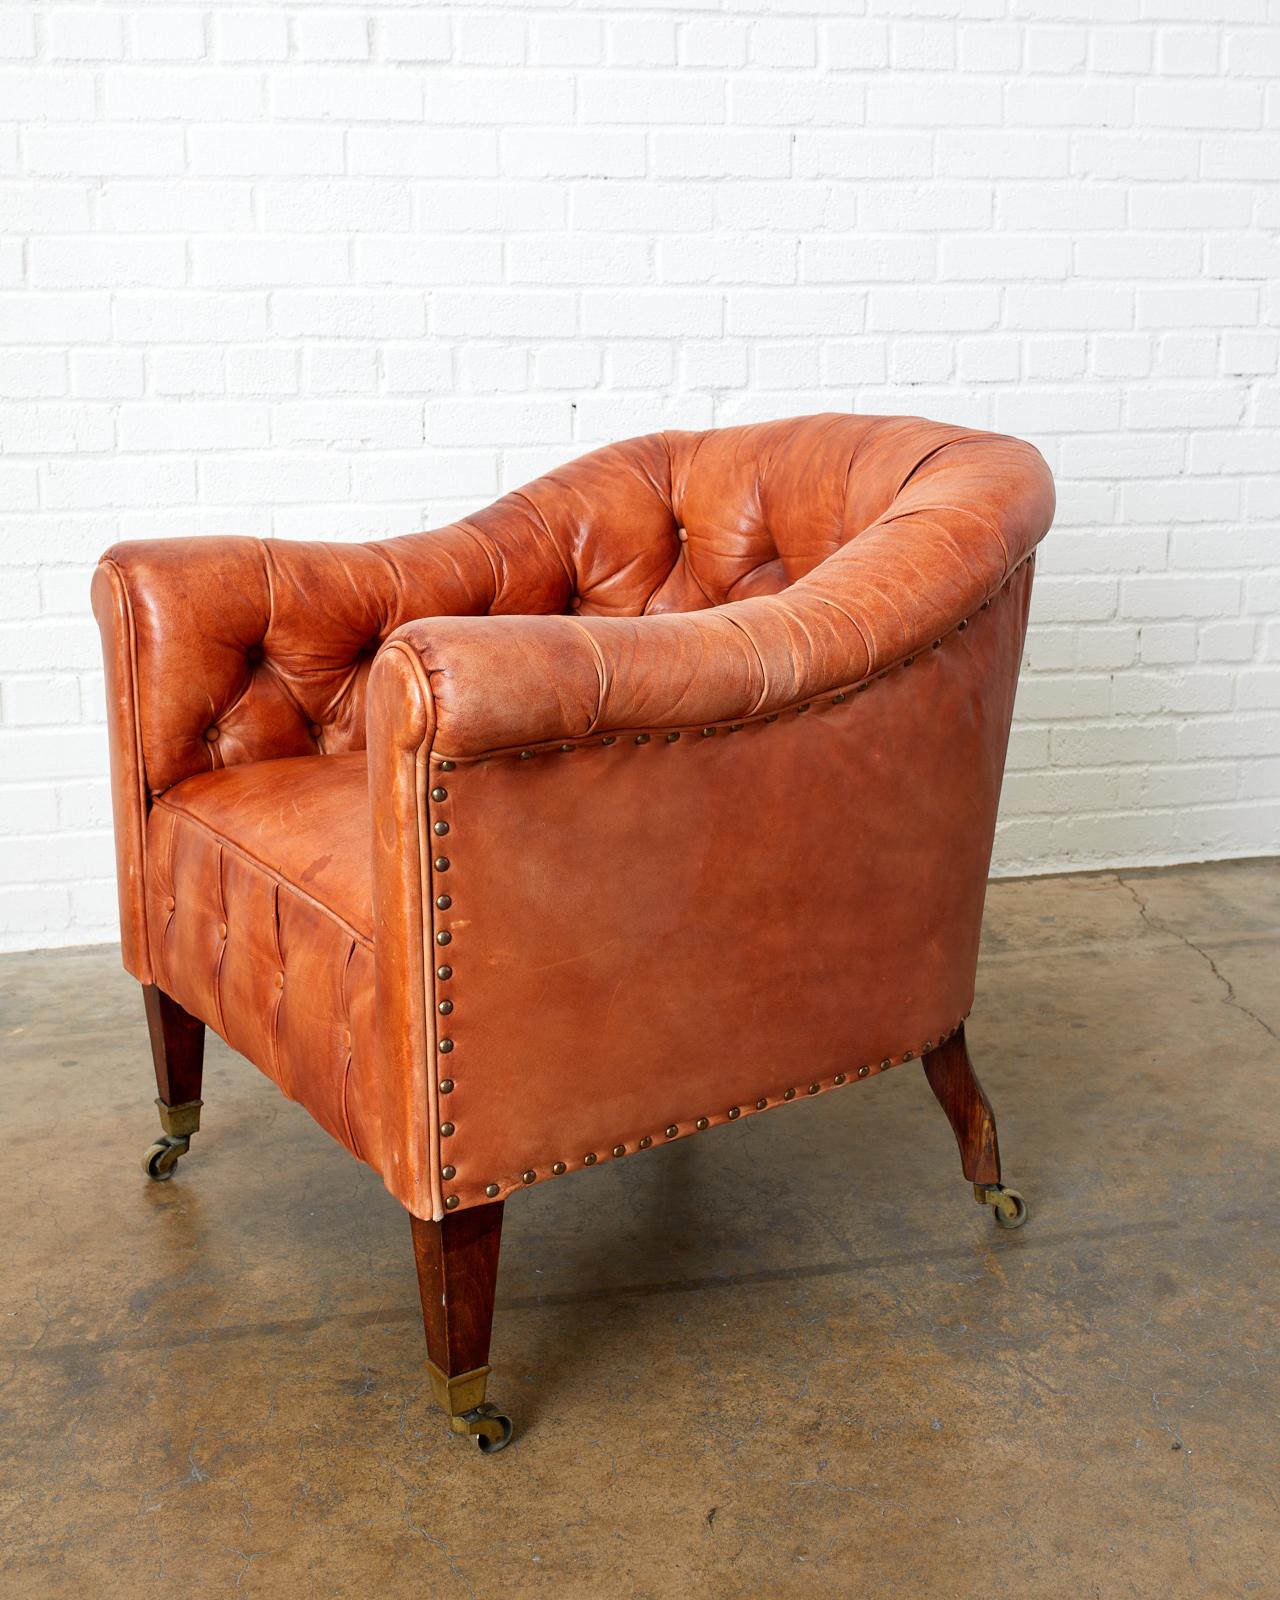 Hand-Crafted Pair of English Tufted Leather Chesterfield Club Chairs